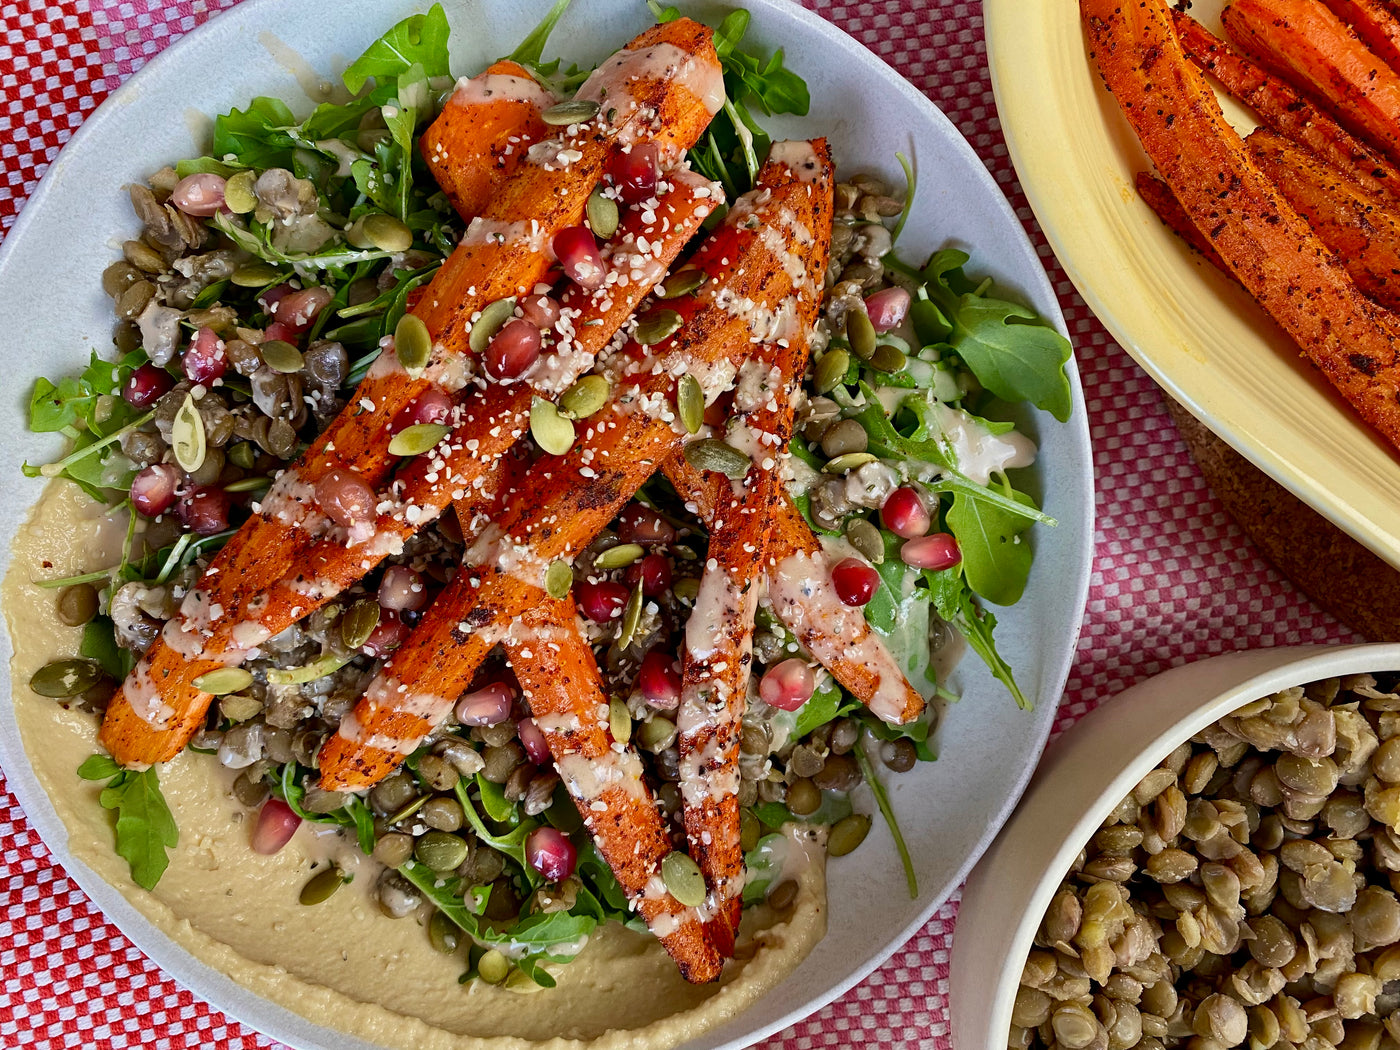 Spicy Roasted Carrots with Arugula and Lentil Salad